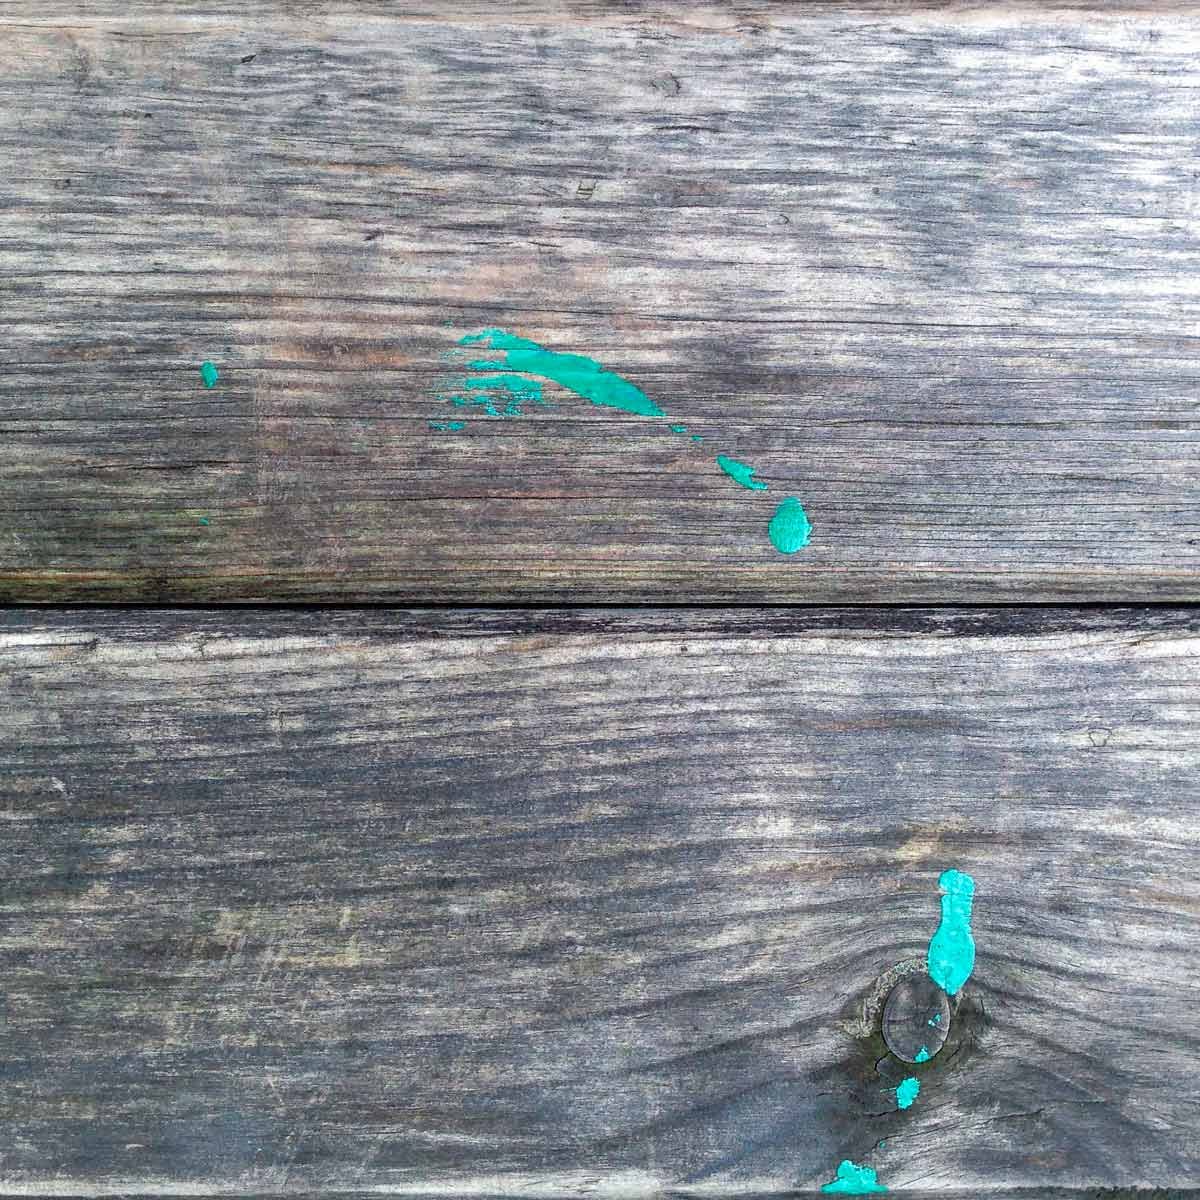 How To Remove Paint From Wood Floors, How Do I Get Paint Off Of Hardwood Floors